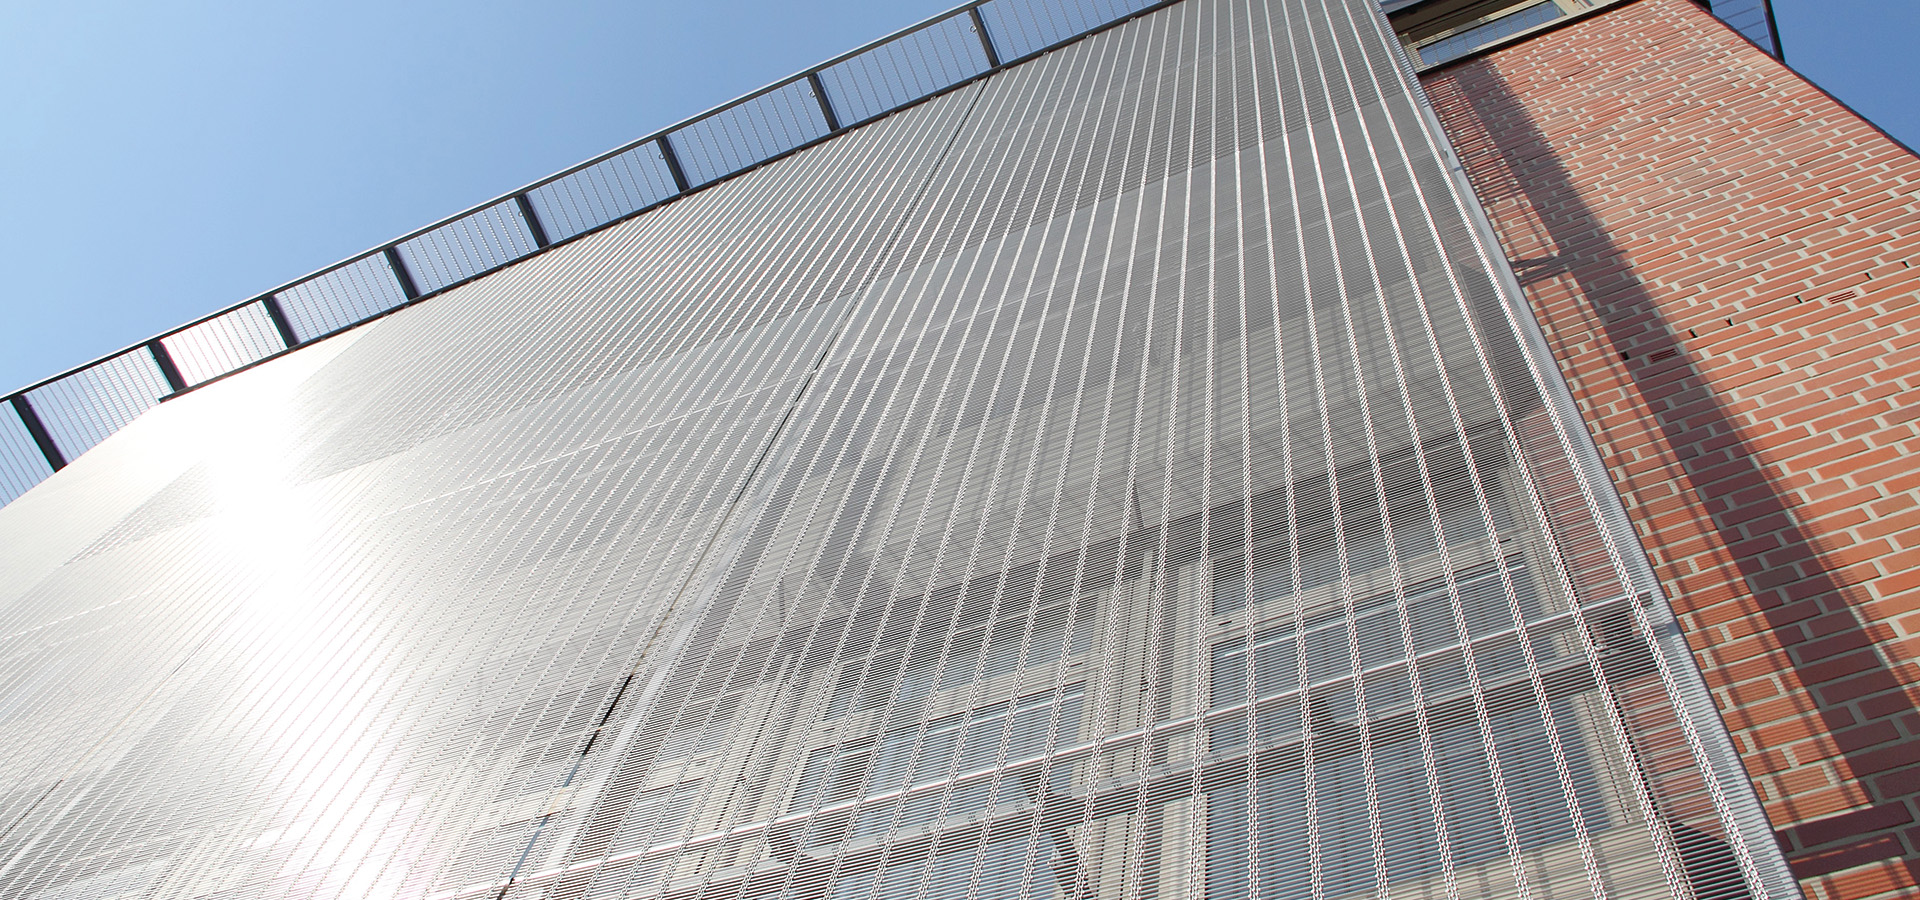 HAVER Architectural Mesh, as a regulated and approved building product by the German Institute for Construction Technology, offers you advantages in the planned implementation of metal mesh façades and wall cladding, as well as fall protection made of stainless steel mesh.